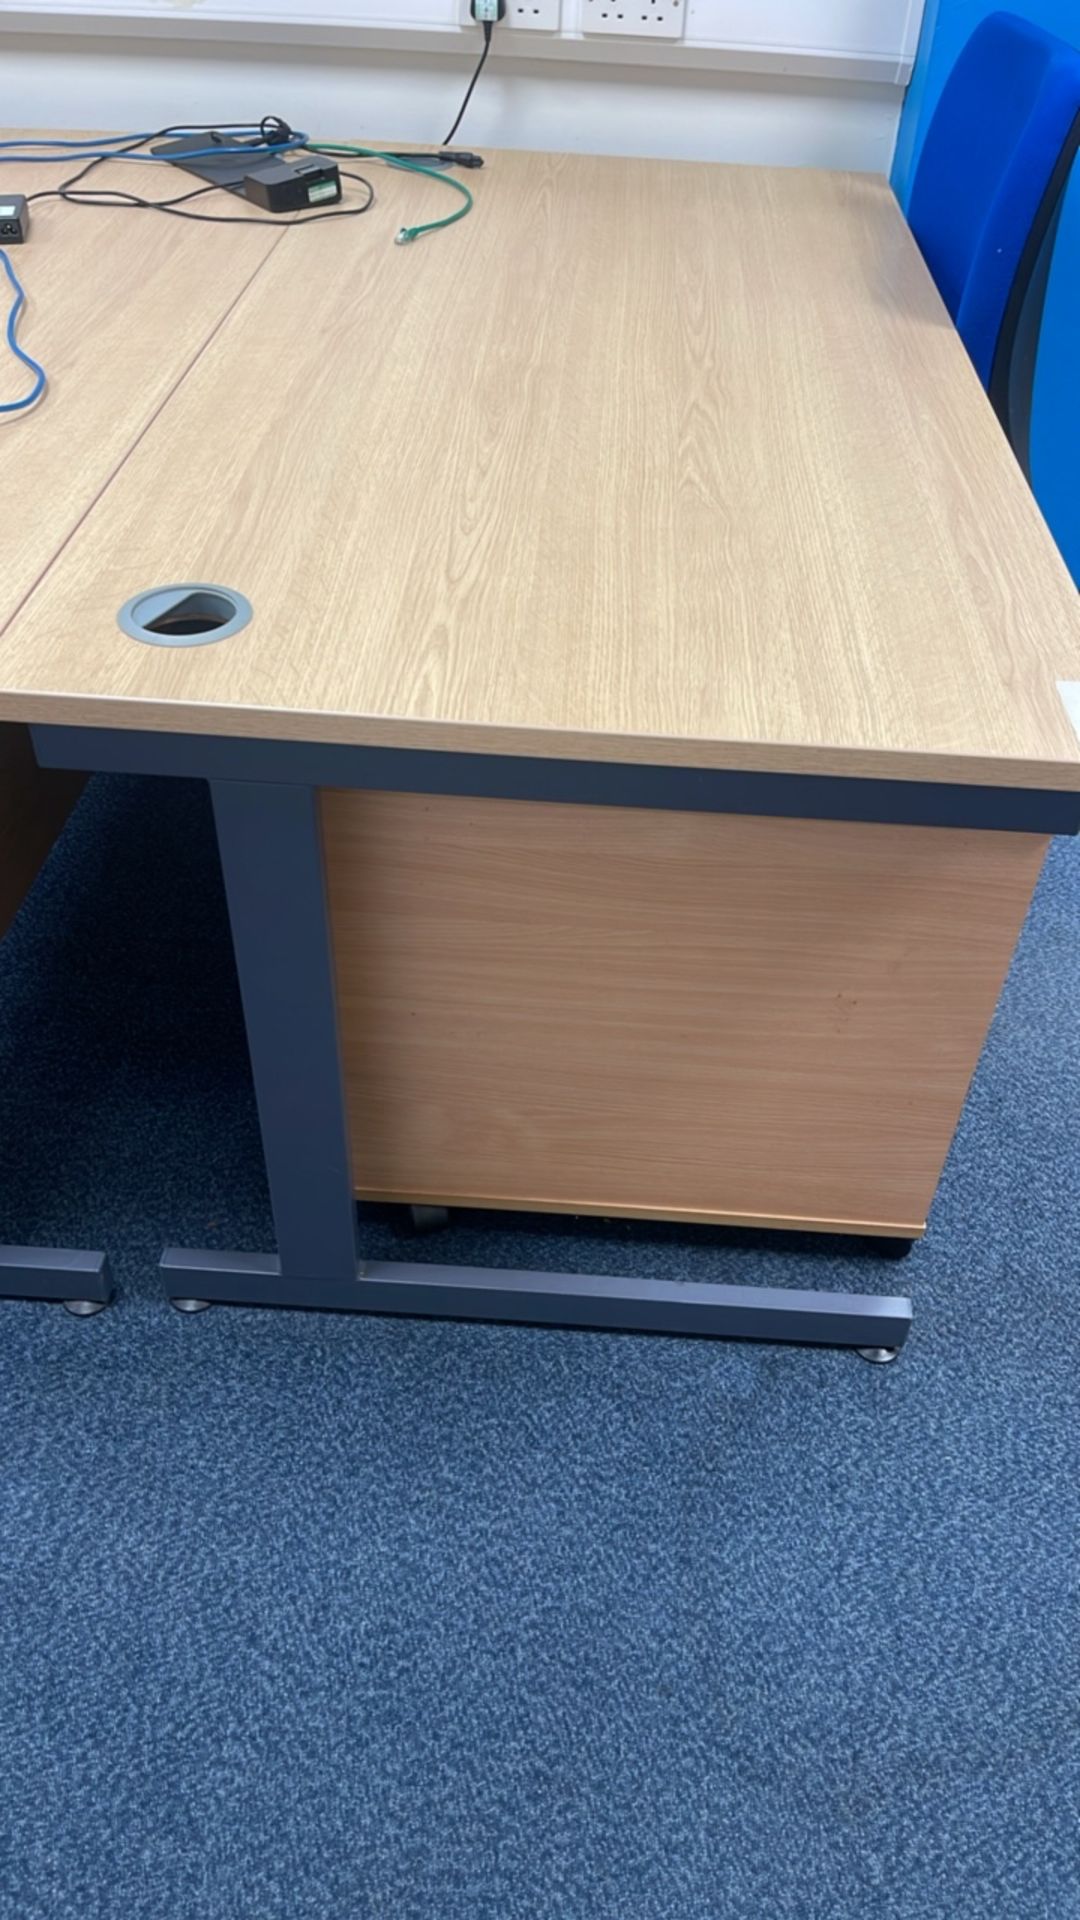 ref 85 - Pair Of Office Desks, Chairs - Image 4 of 7